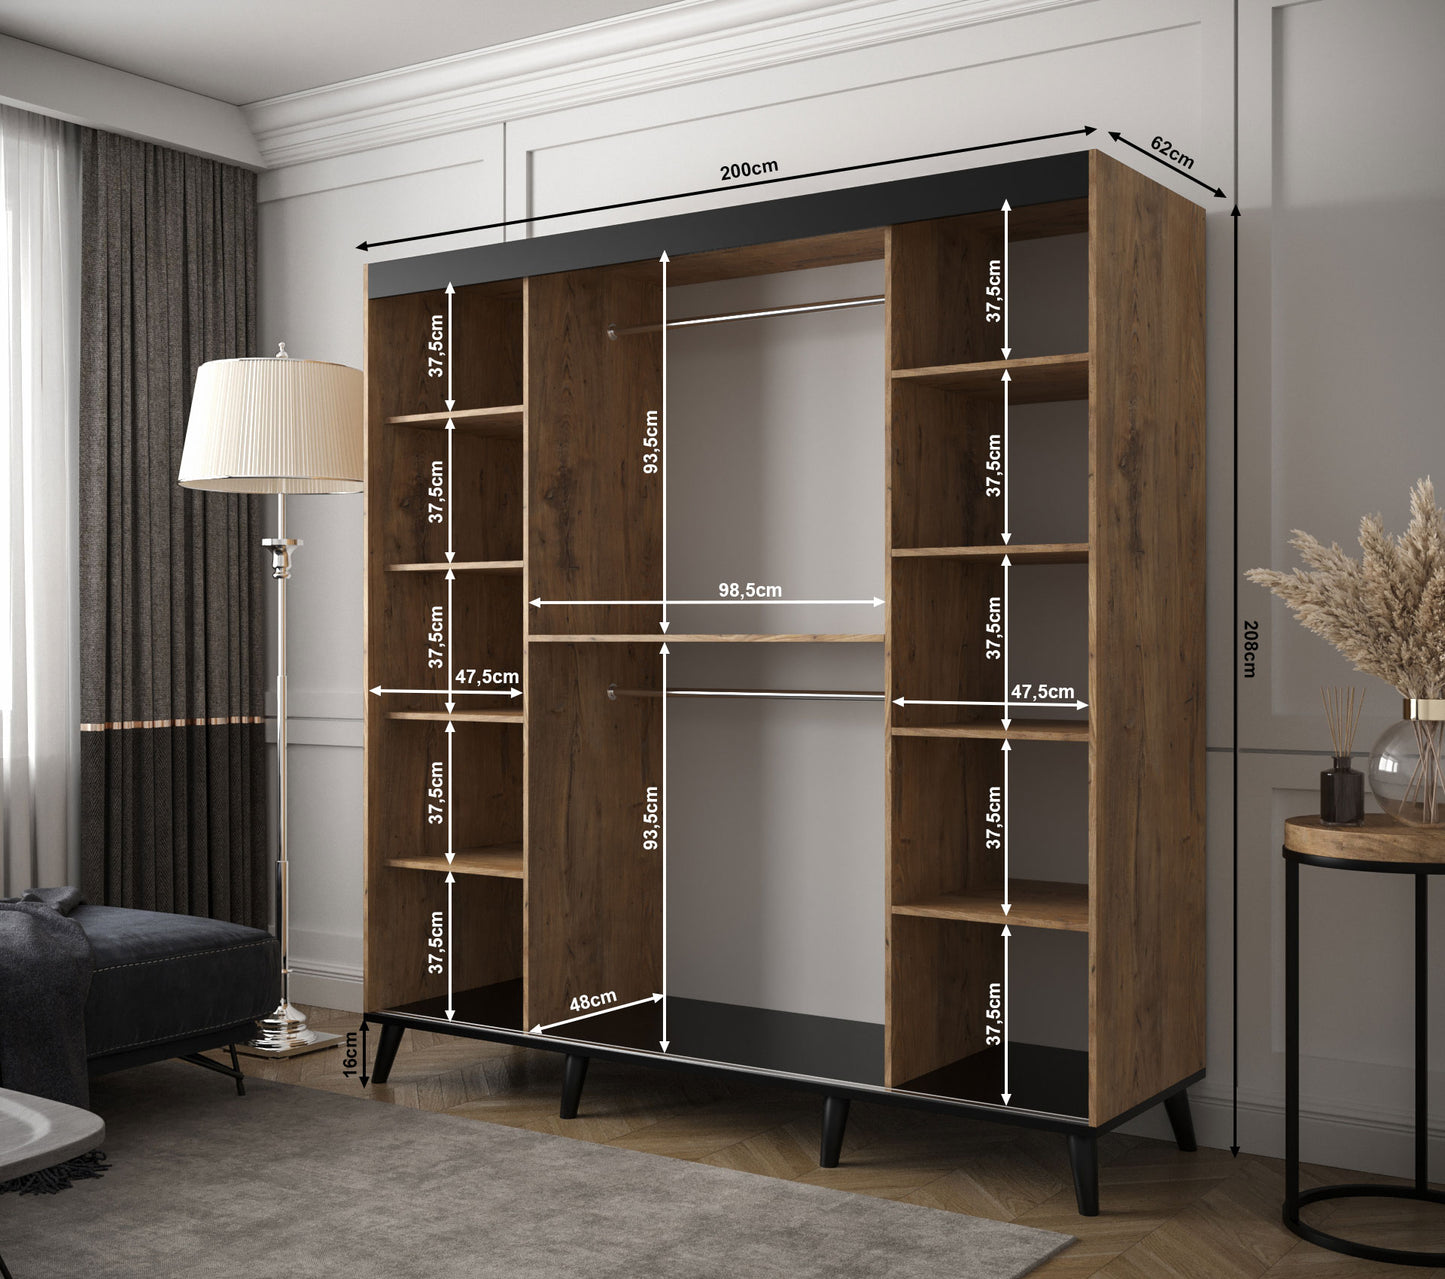 Galicia T3 - Industrial Style Wardrobe Mirrors Shelves Drawers Optional >200 cm x 208 cm<